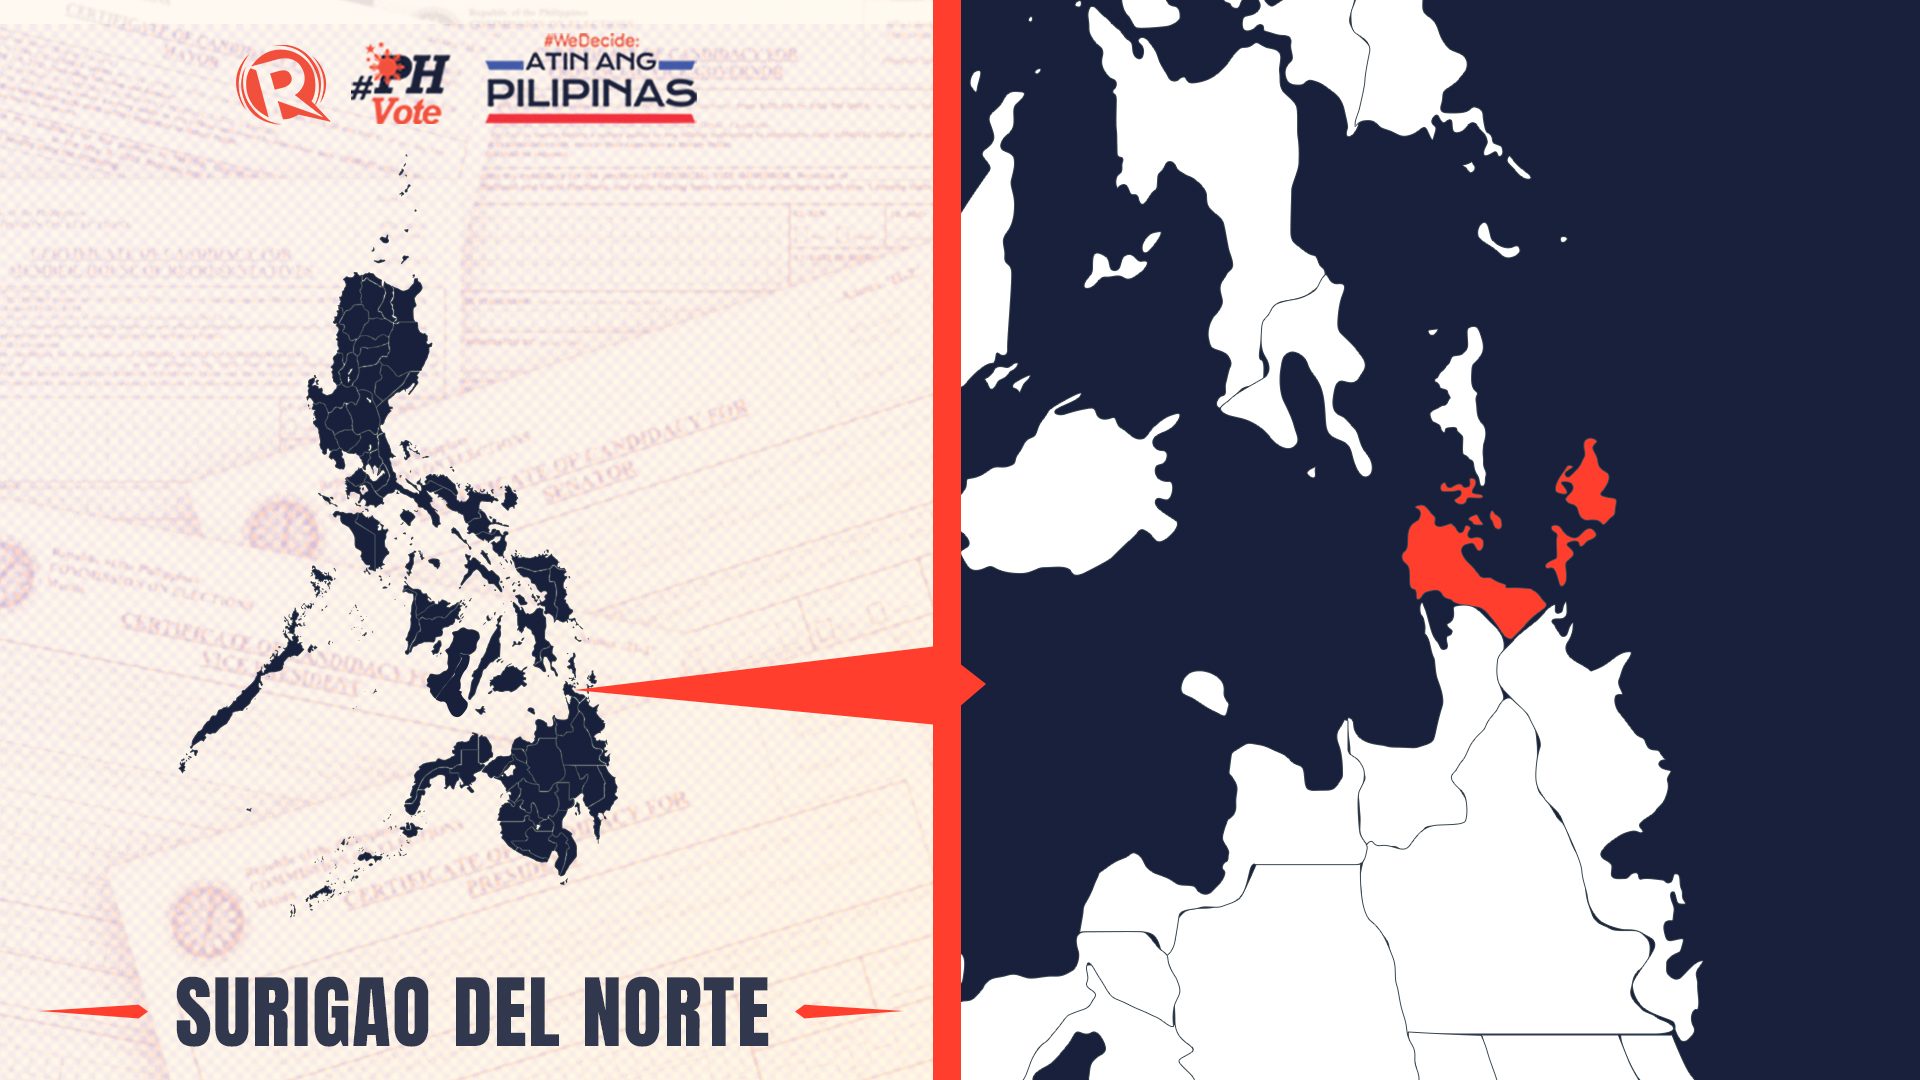 LIST: Who is running in Surigao del Norte in the 2022 Philippine elections?